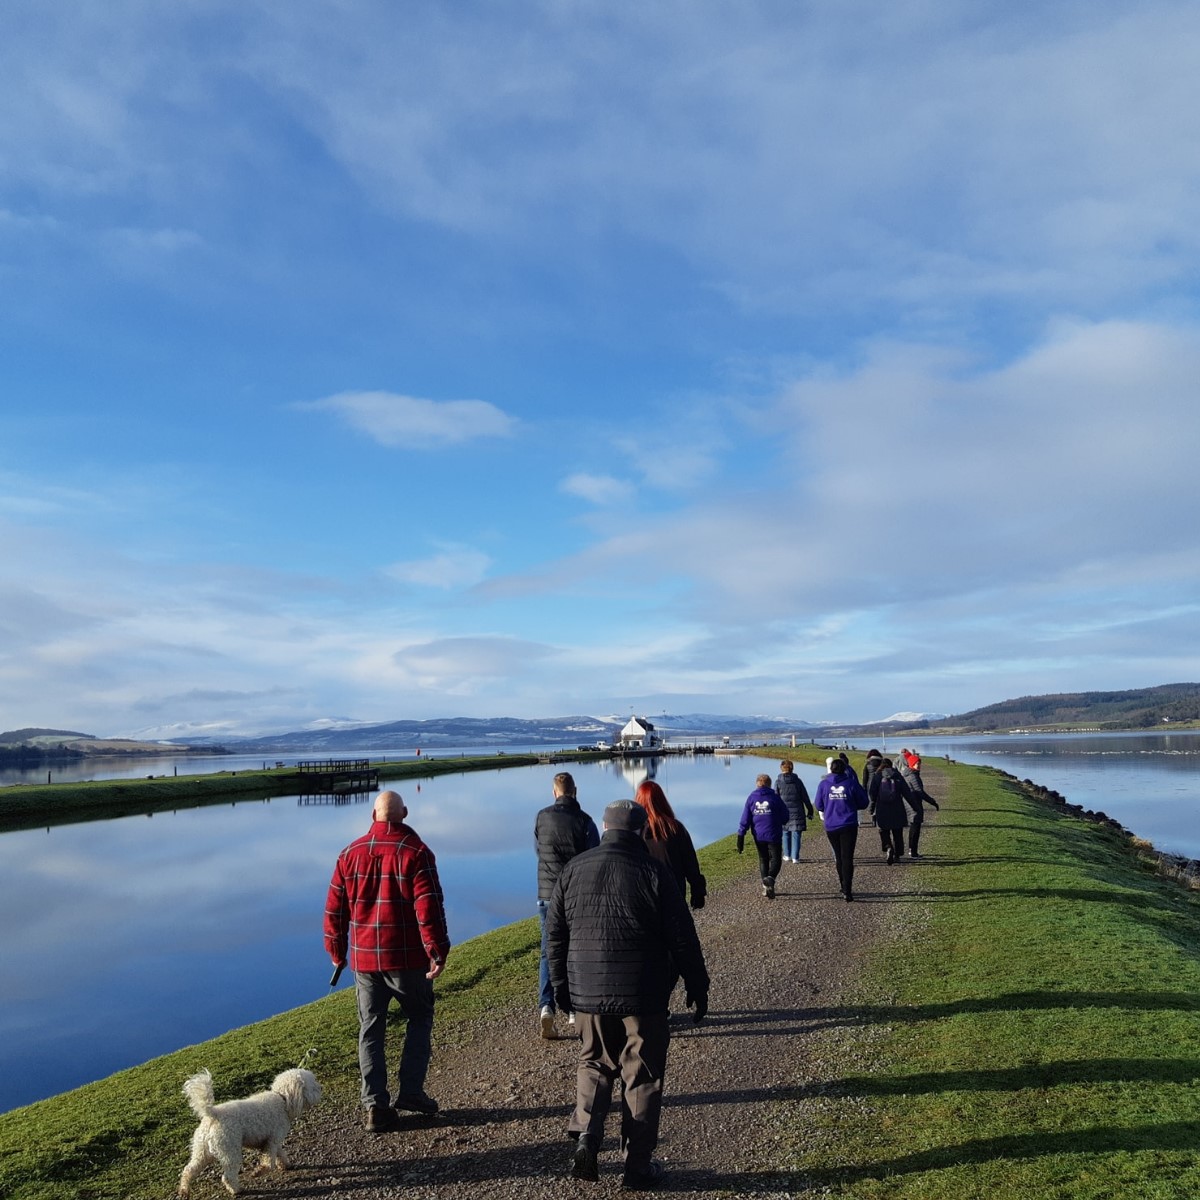 Clarity Walk takes big step forward thanks to Cairn Community Fund